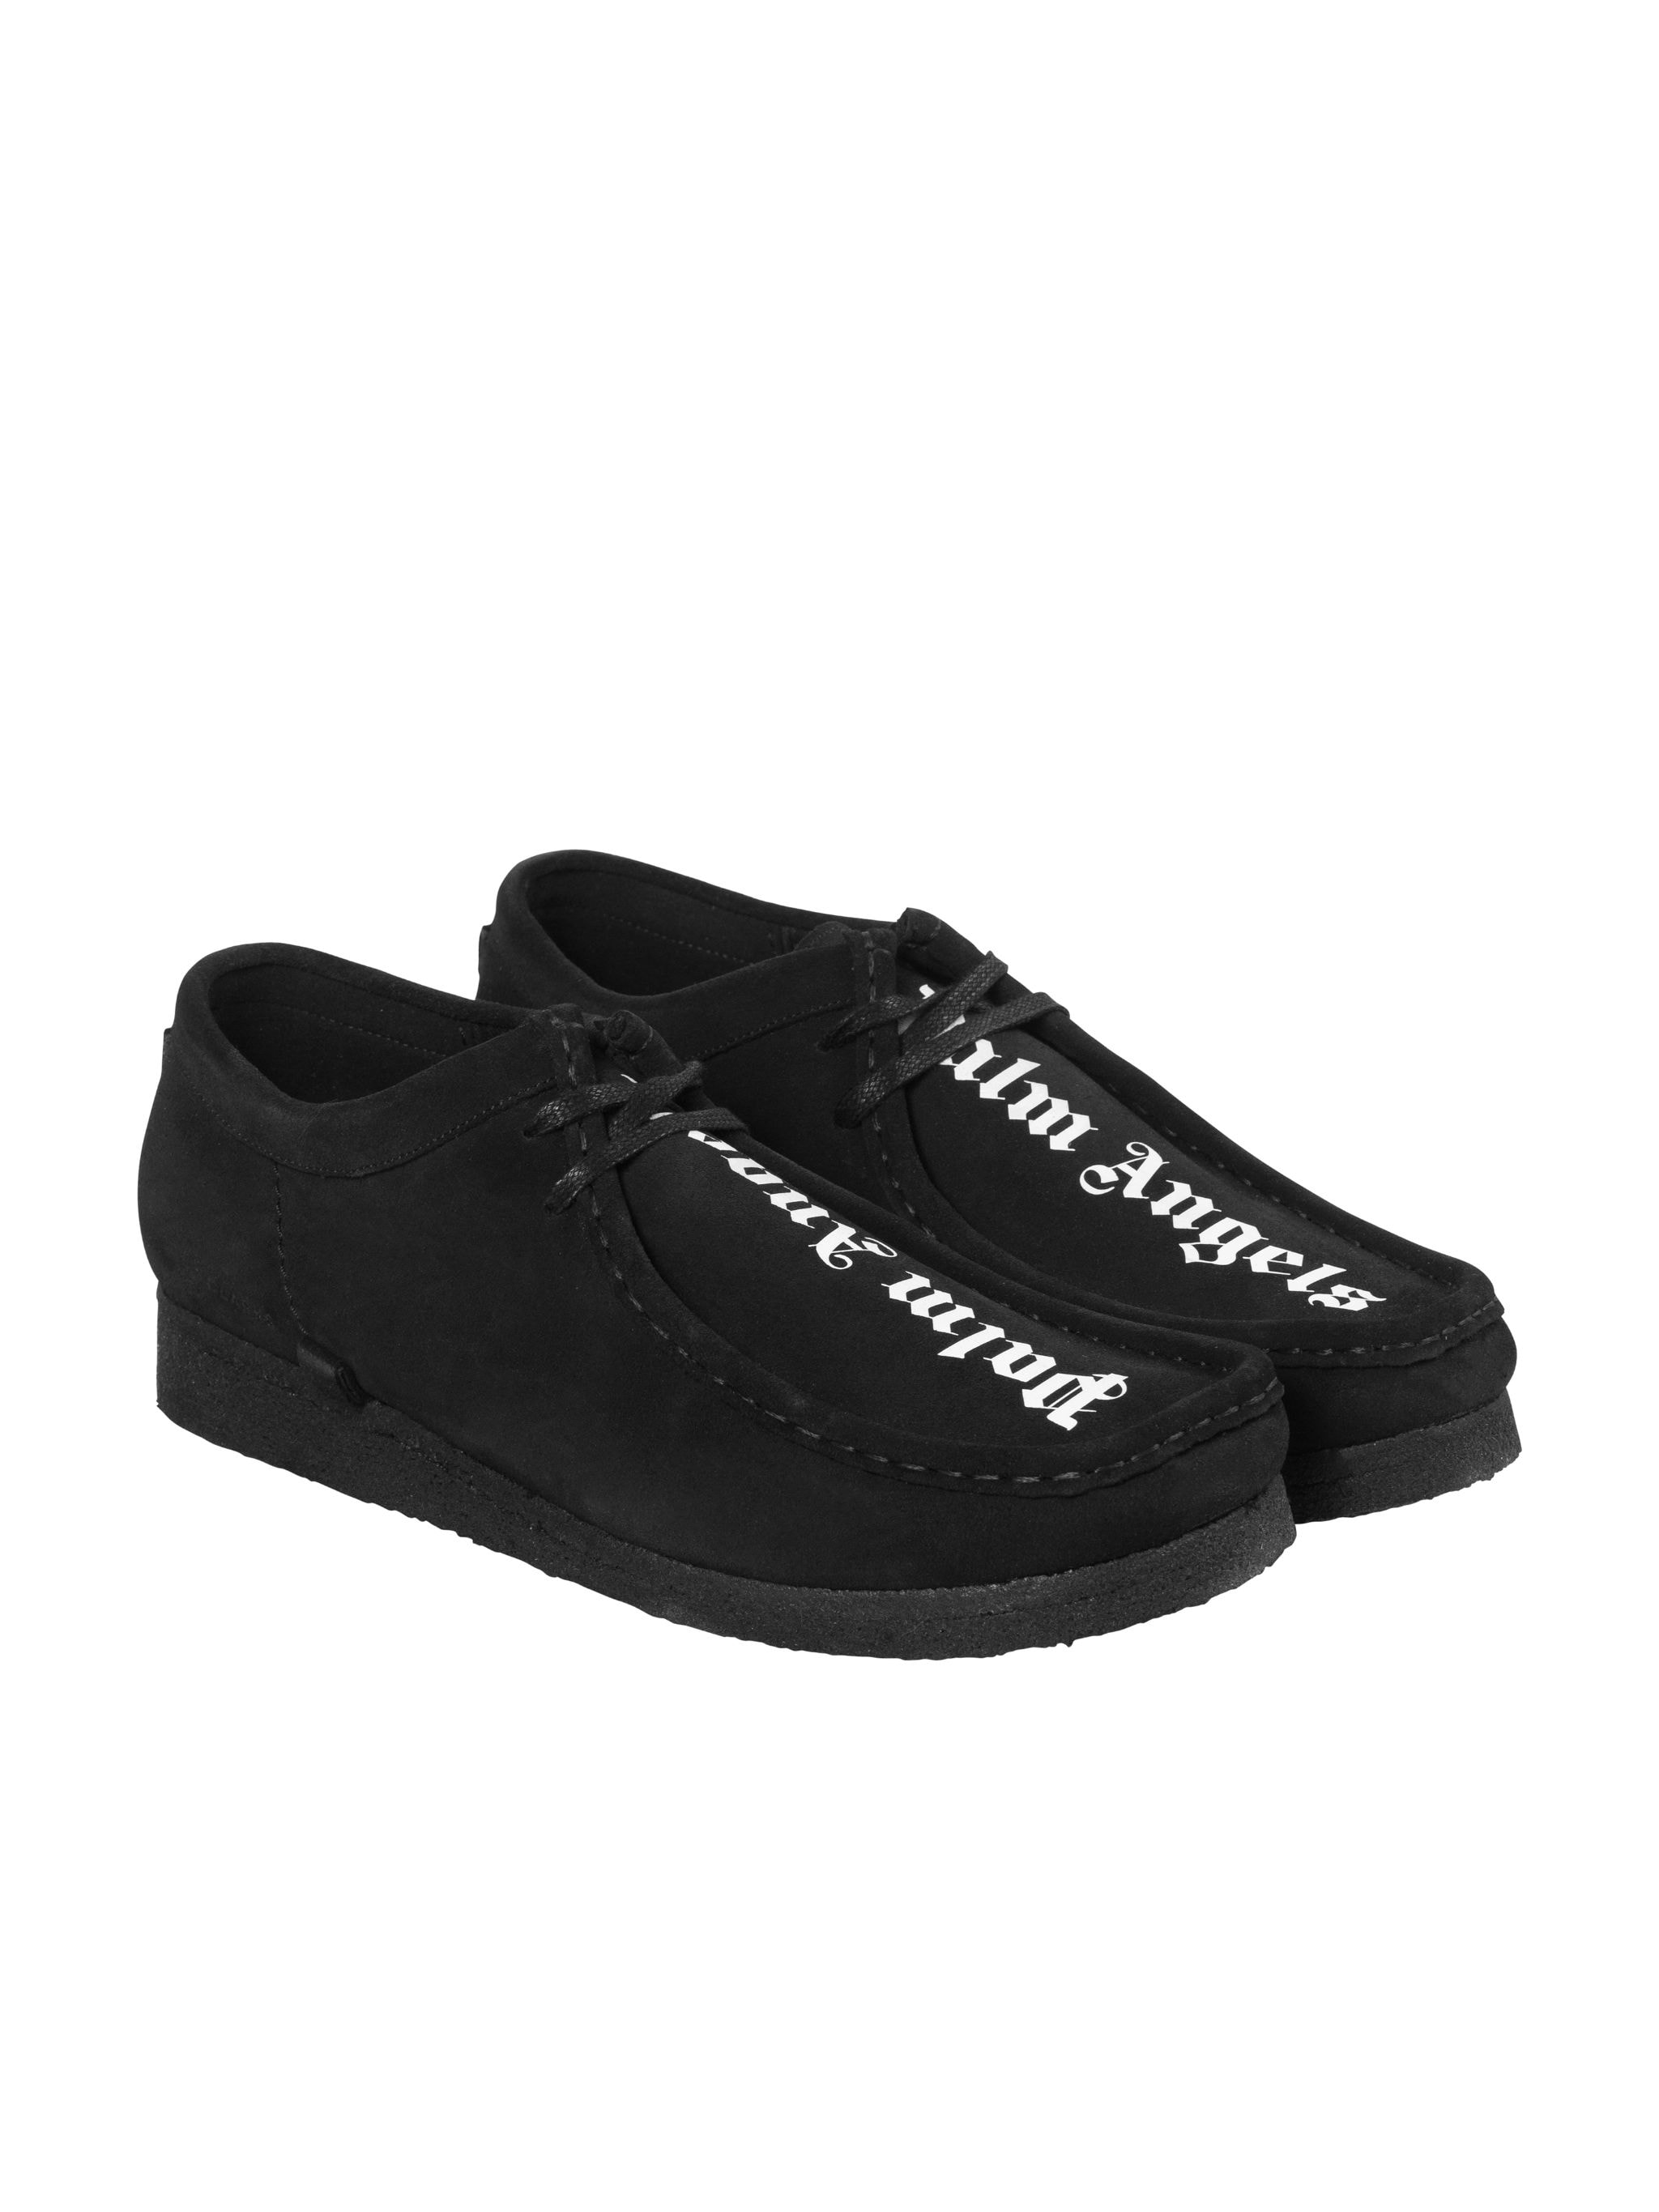 Clarks Wallabees Black - Palm Angels 